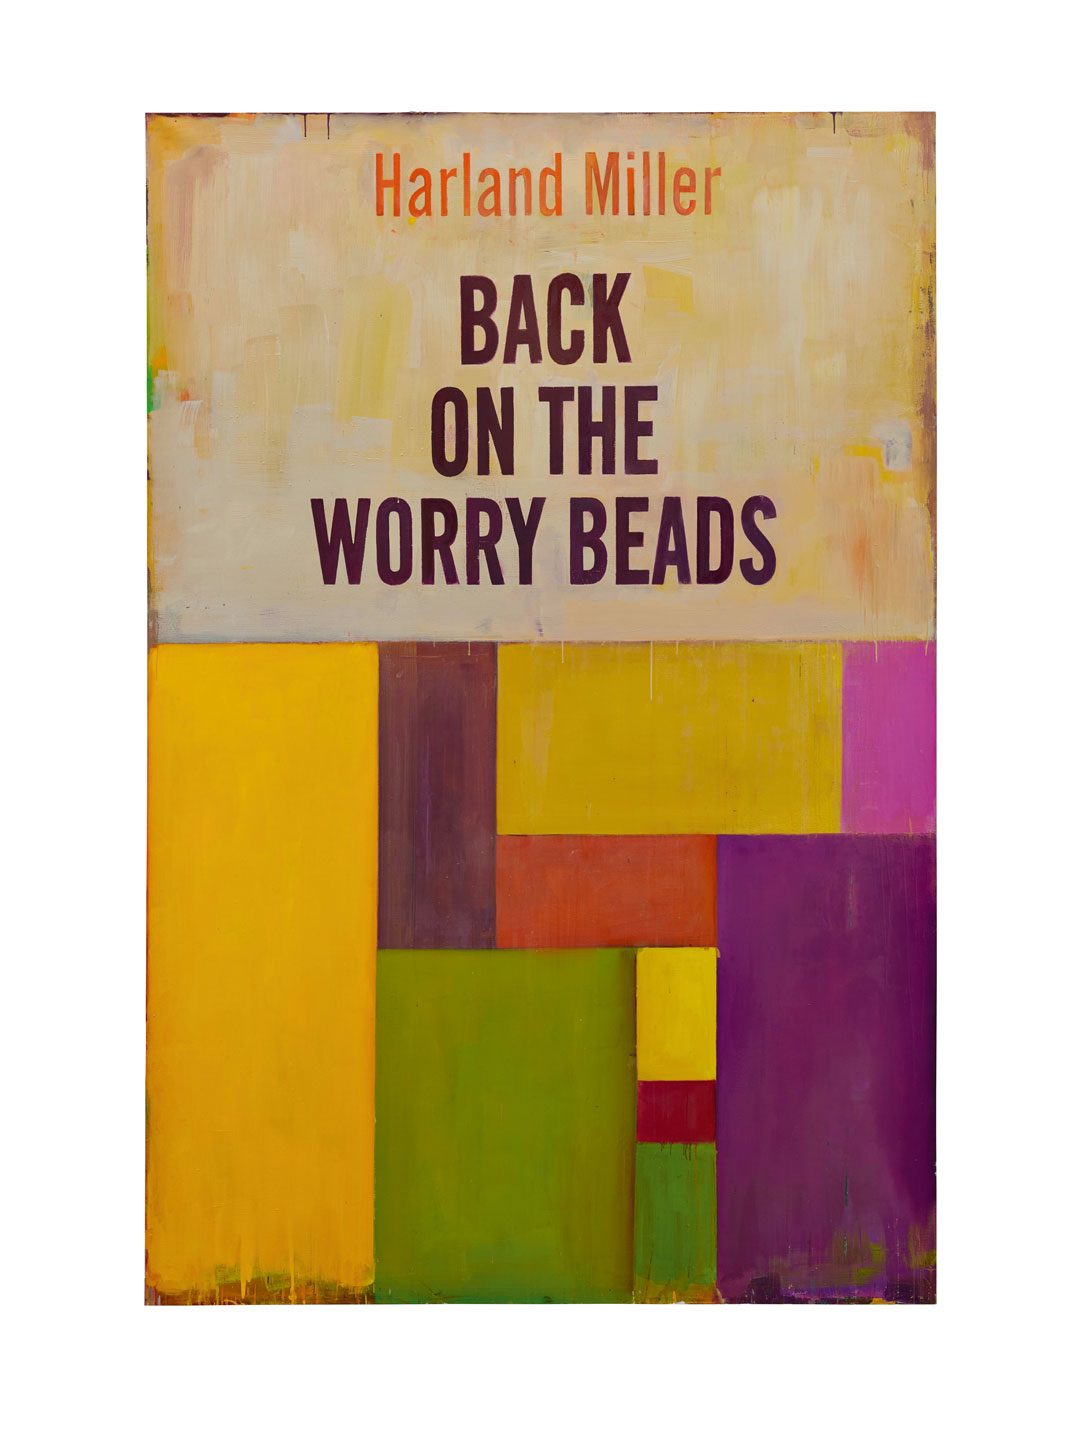 Back on the Worry Beads, 2016, oil on canvas, 276 × 183 cm (10811/16 × 72 1/16 in). © Harland Miller 